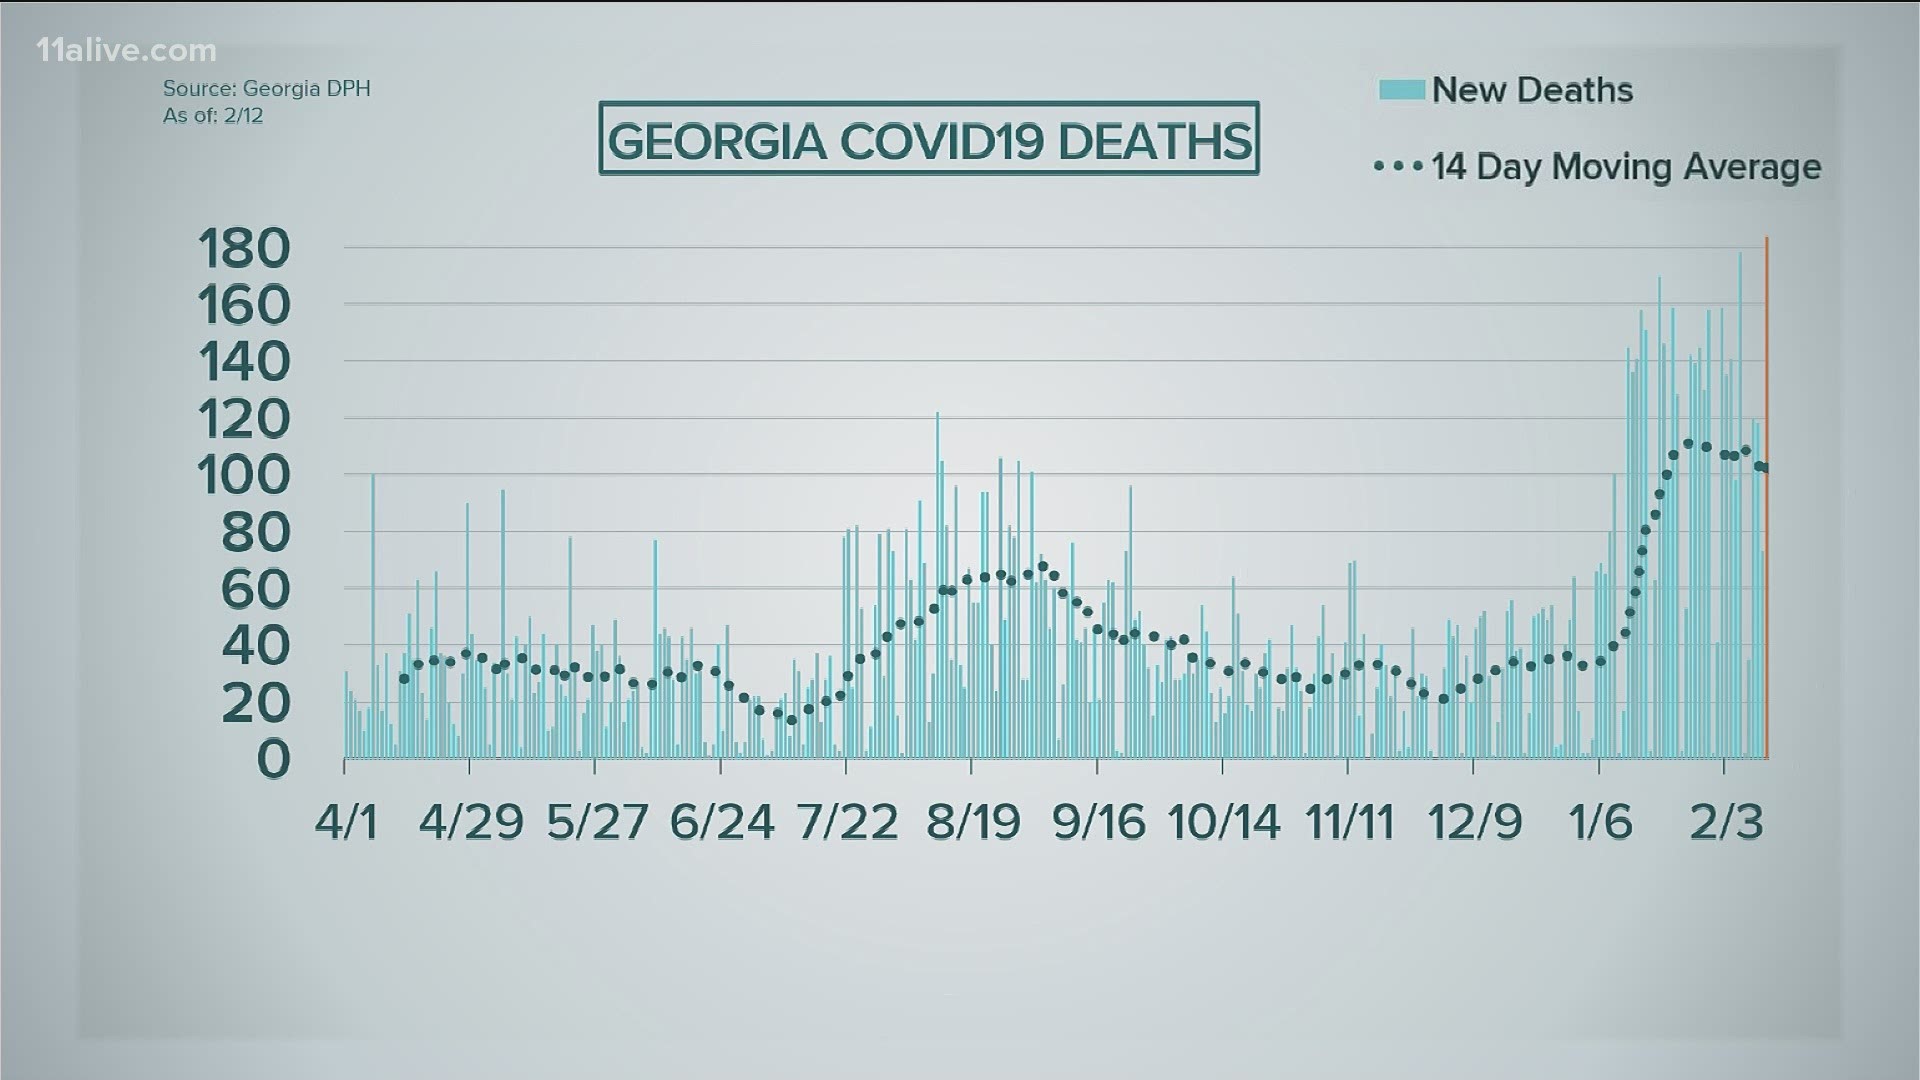 As of 3 p.m., there have been 13,856 deaths in Georgia, an increase of 184 since the previous day.